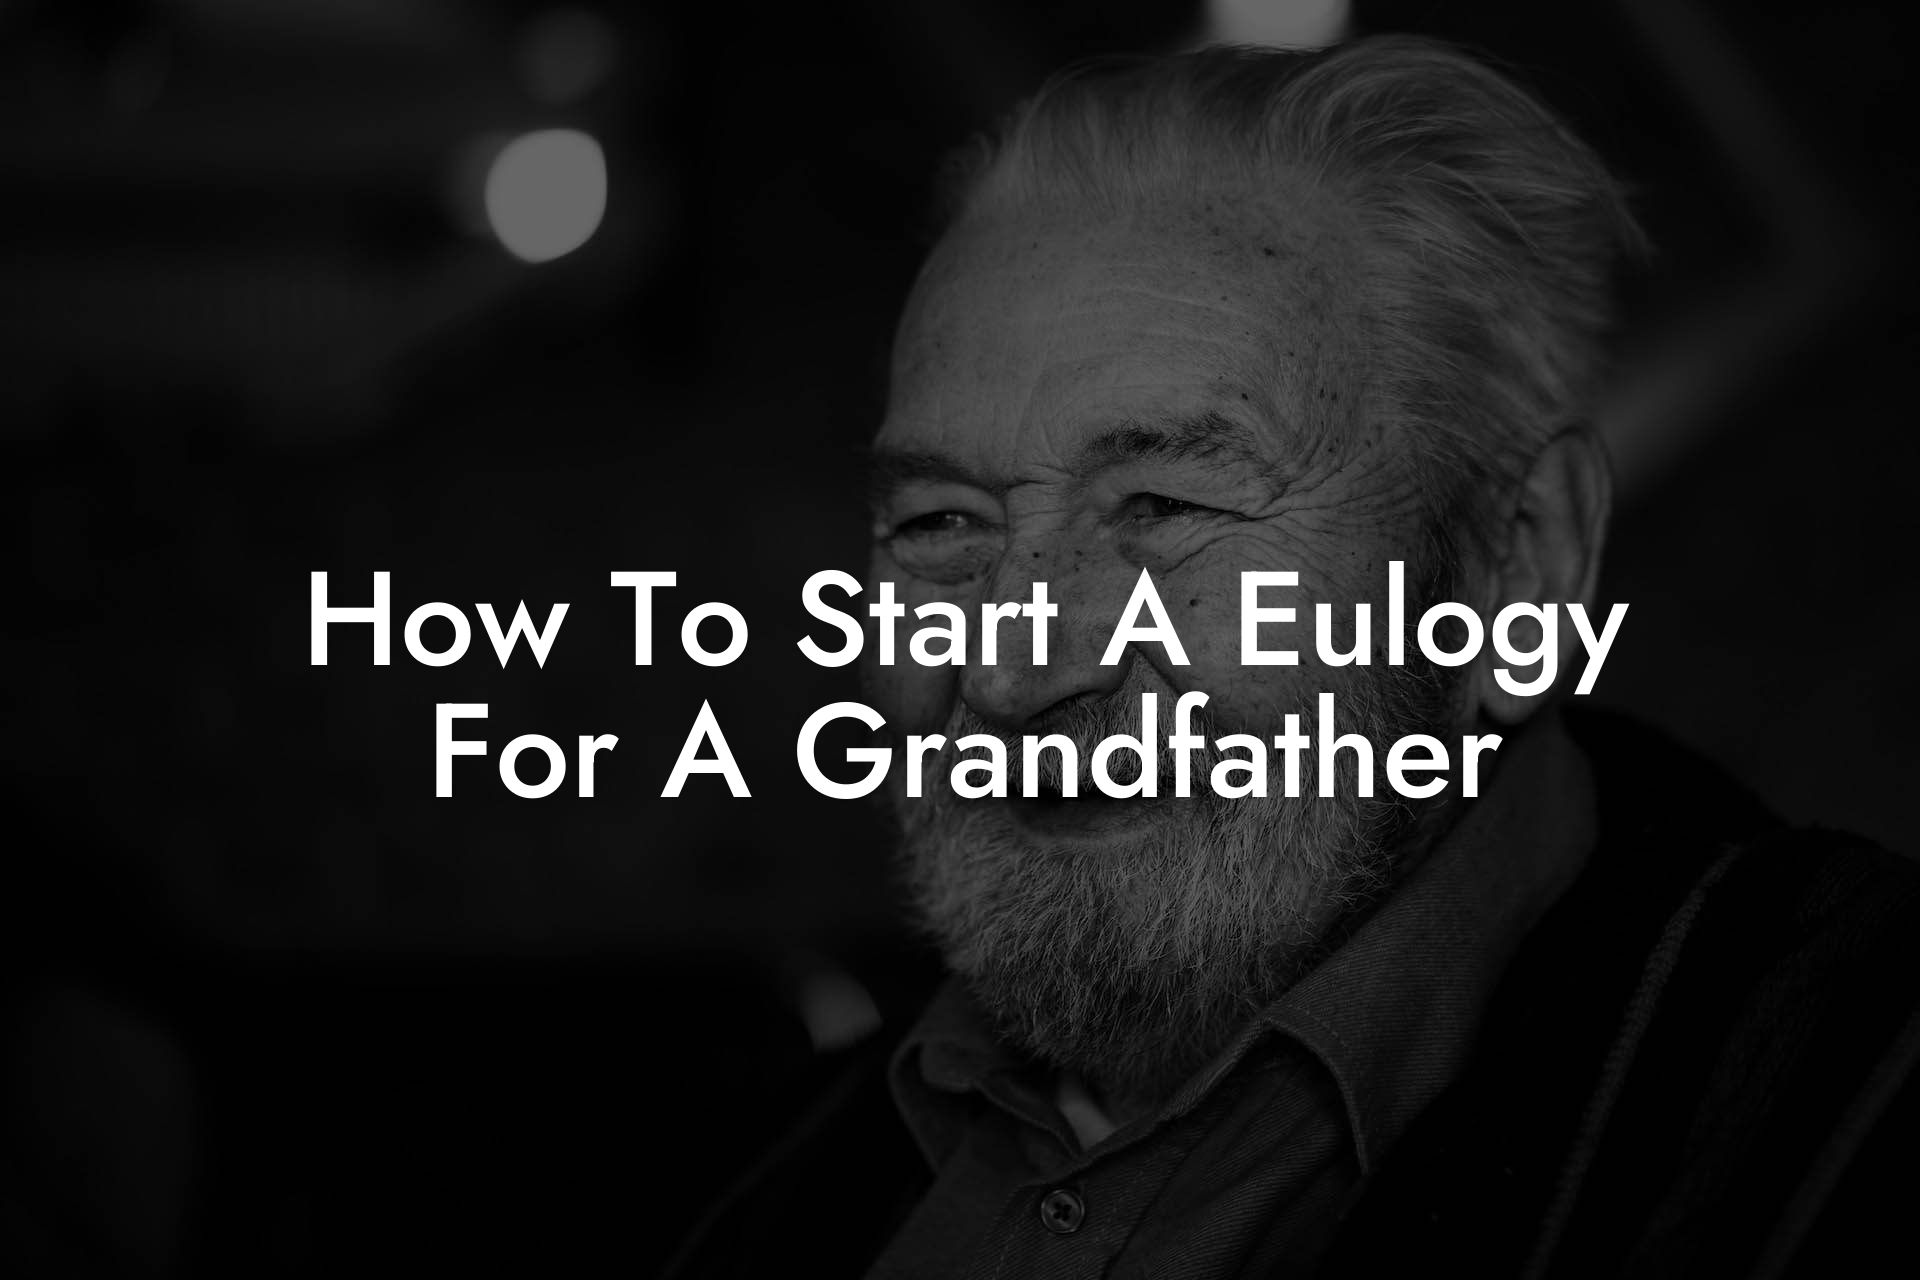 How To Start A Eulogy For A Grandfather